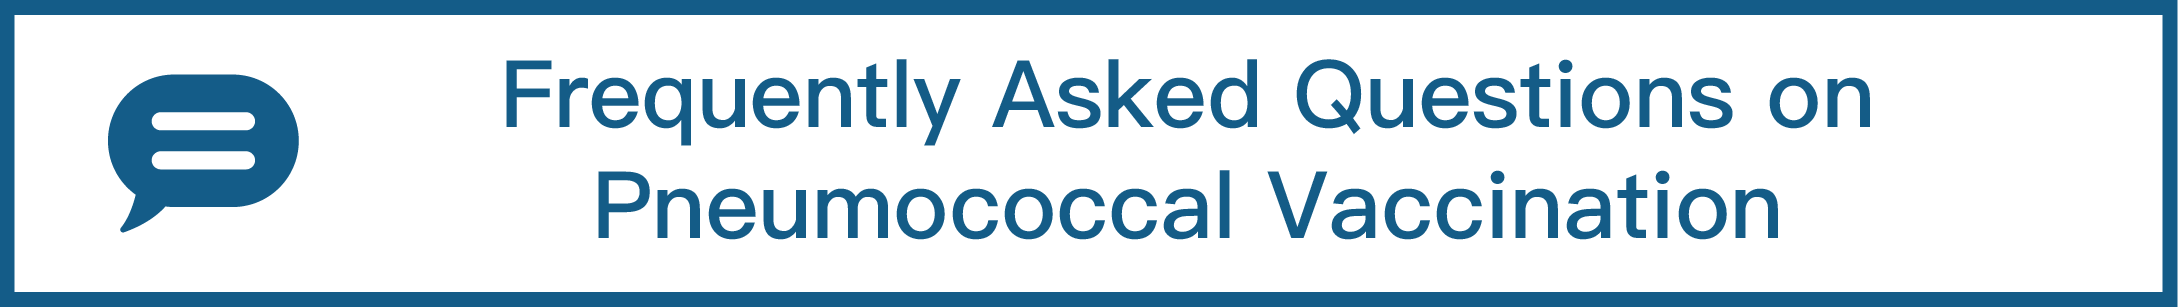 Frequently Asked Questions on Pneumococcal Vaccination